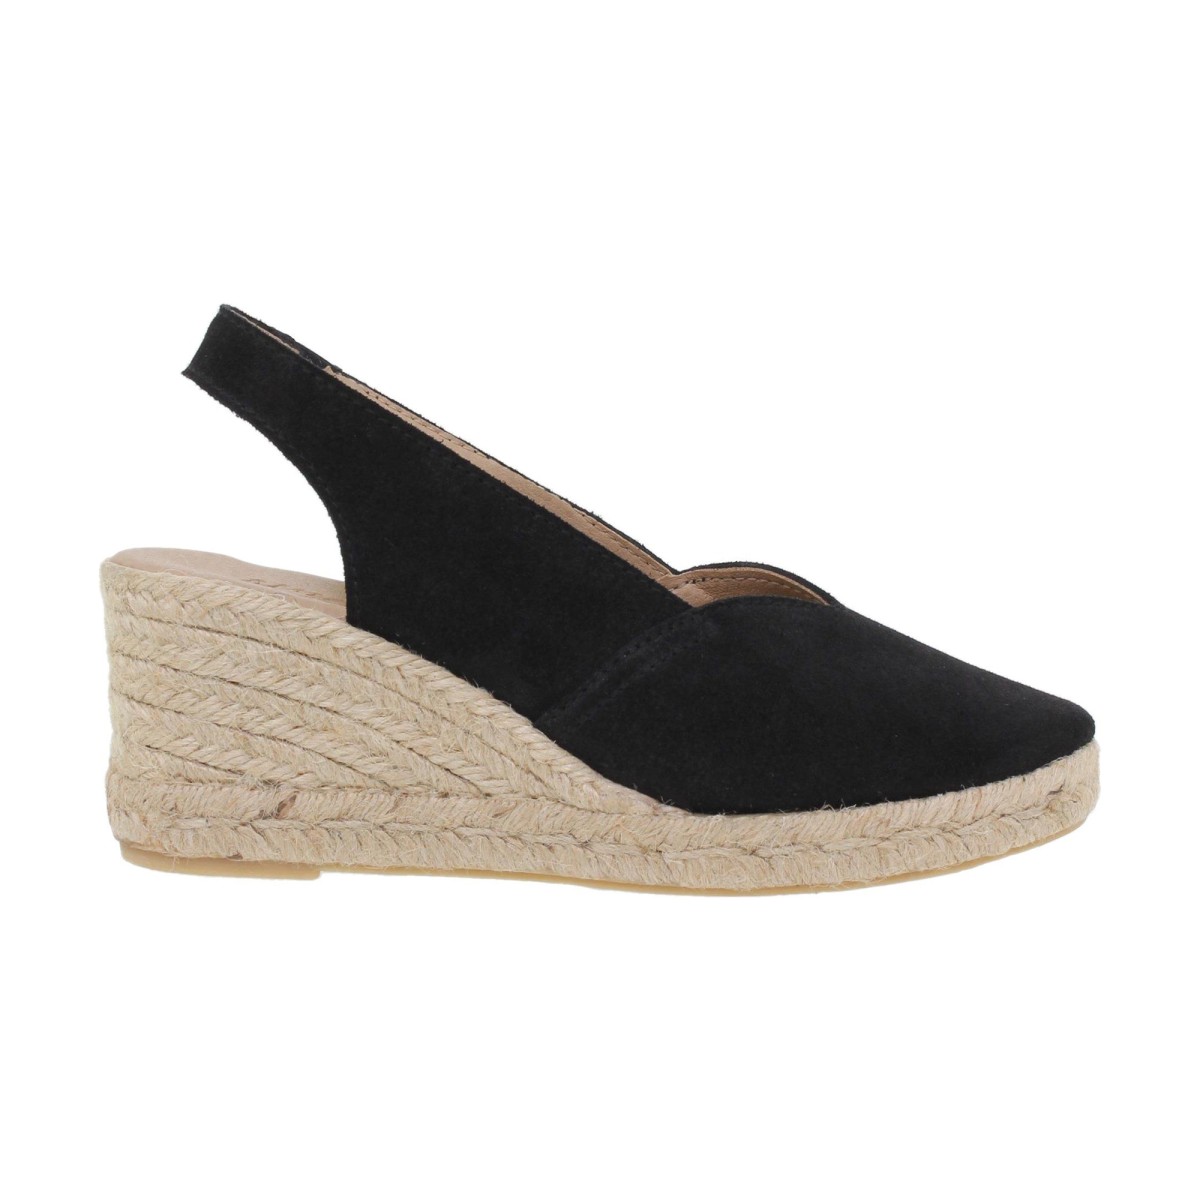 Black leather espadrilles with wedge by Amelie